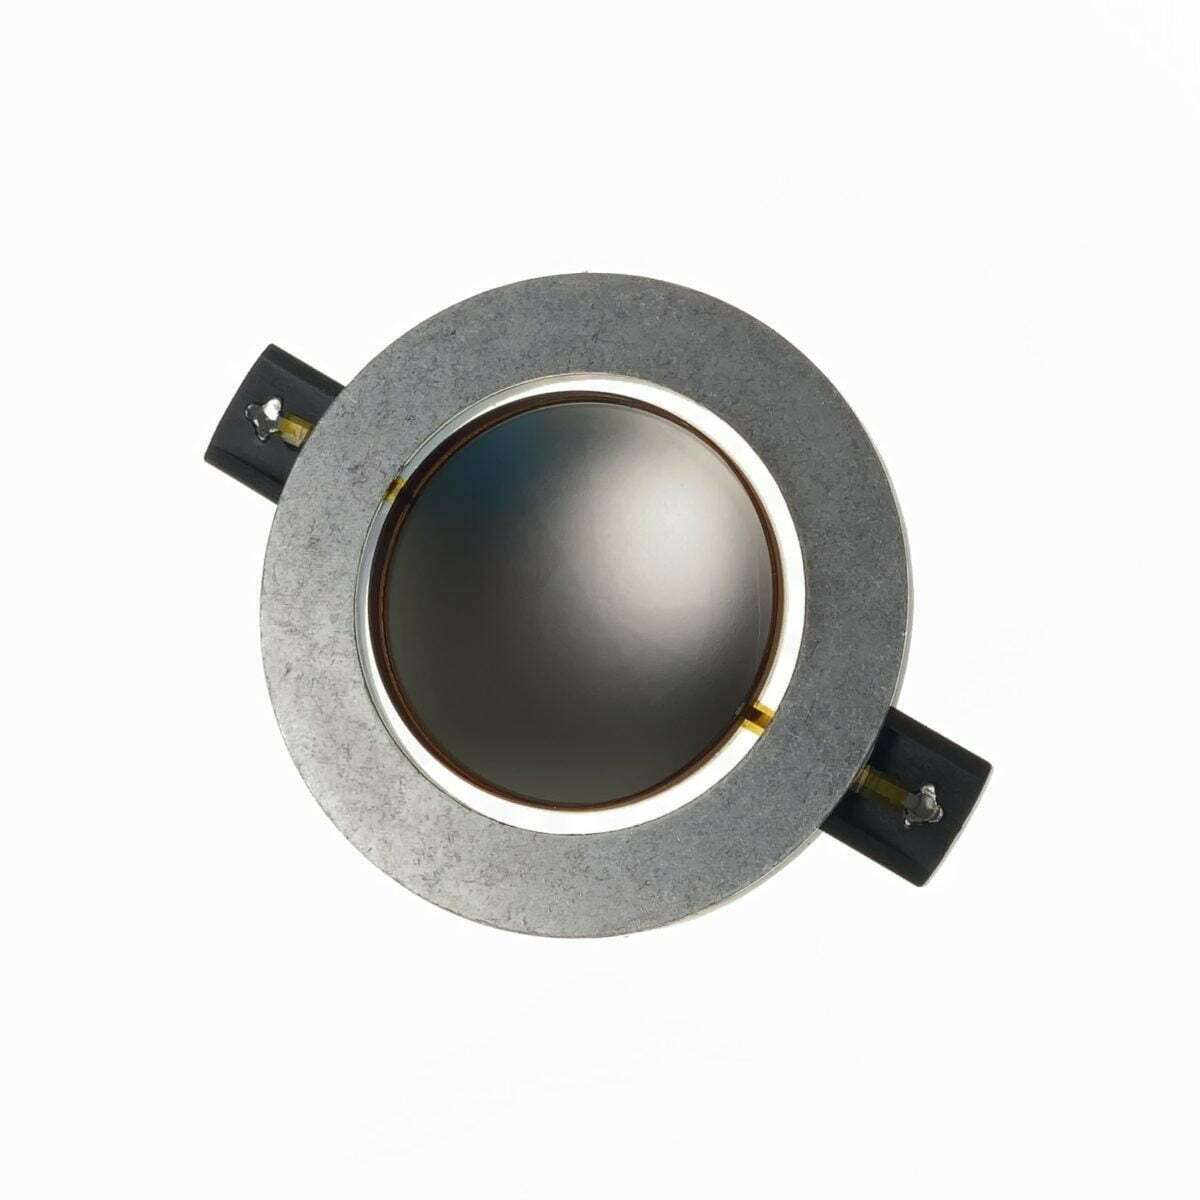 Replacement Diaphragm for RCF N450, ART 300A, RCF-M81, RCF N350, EAW 15410081